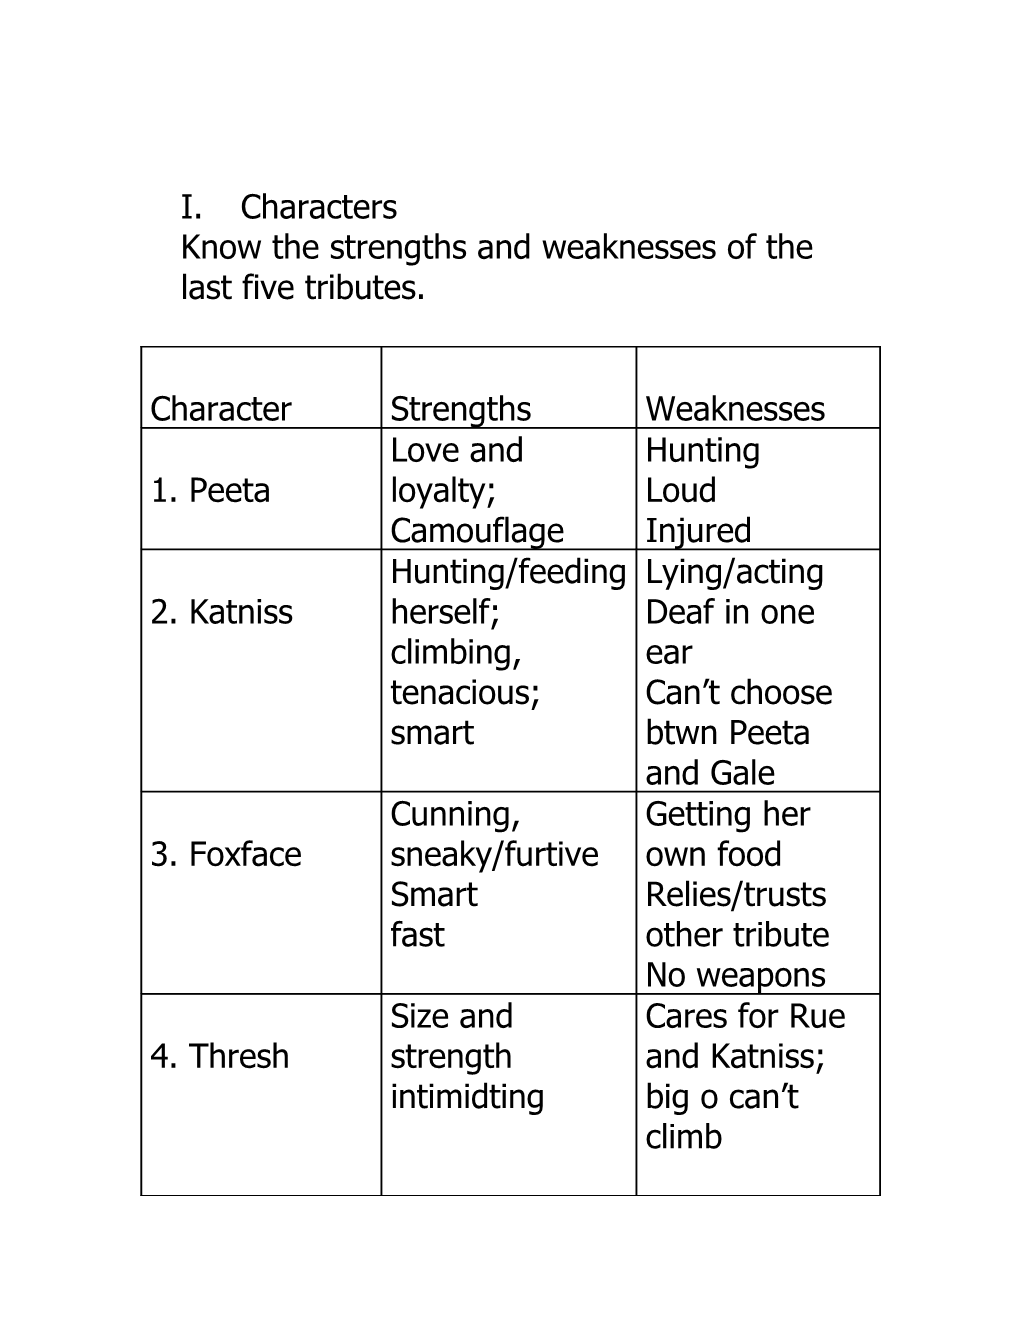 Know the Strengths and Weaknesses of the Last Five Tributes